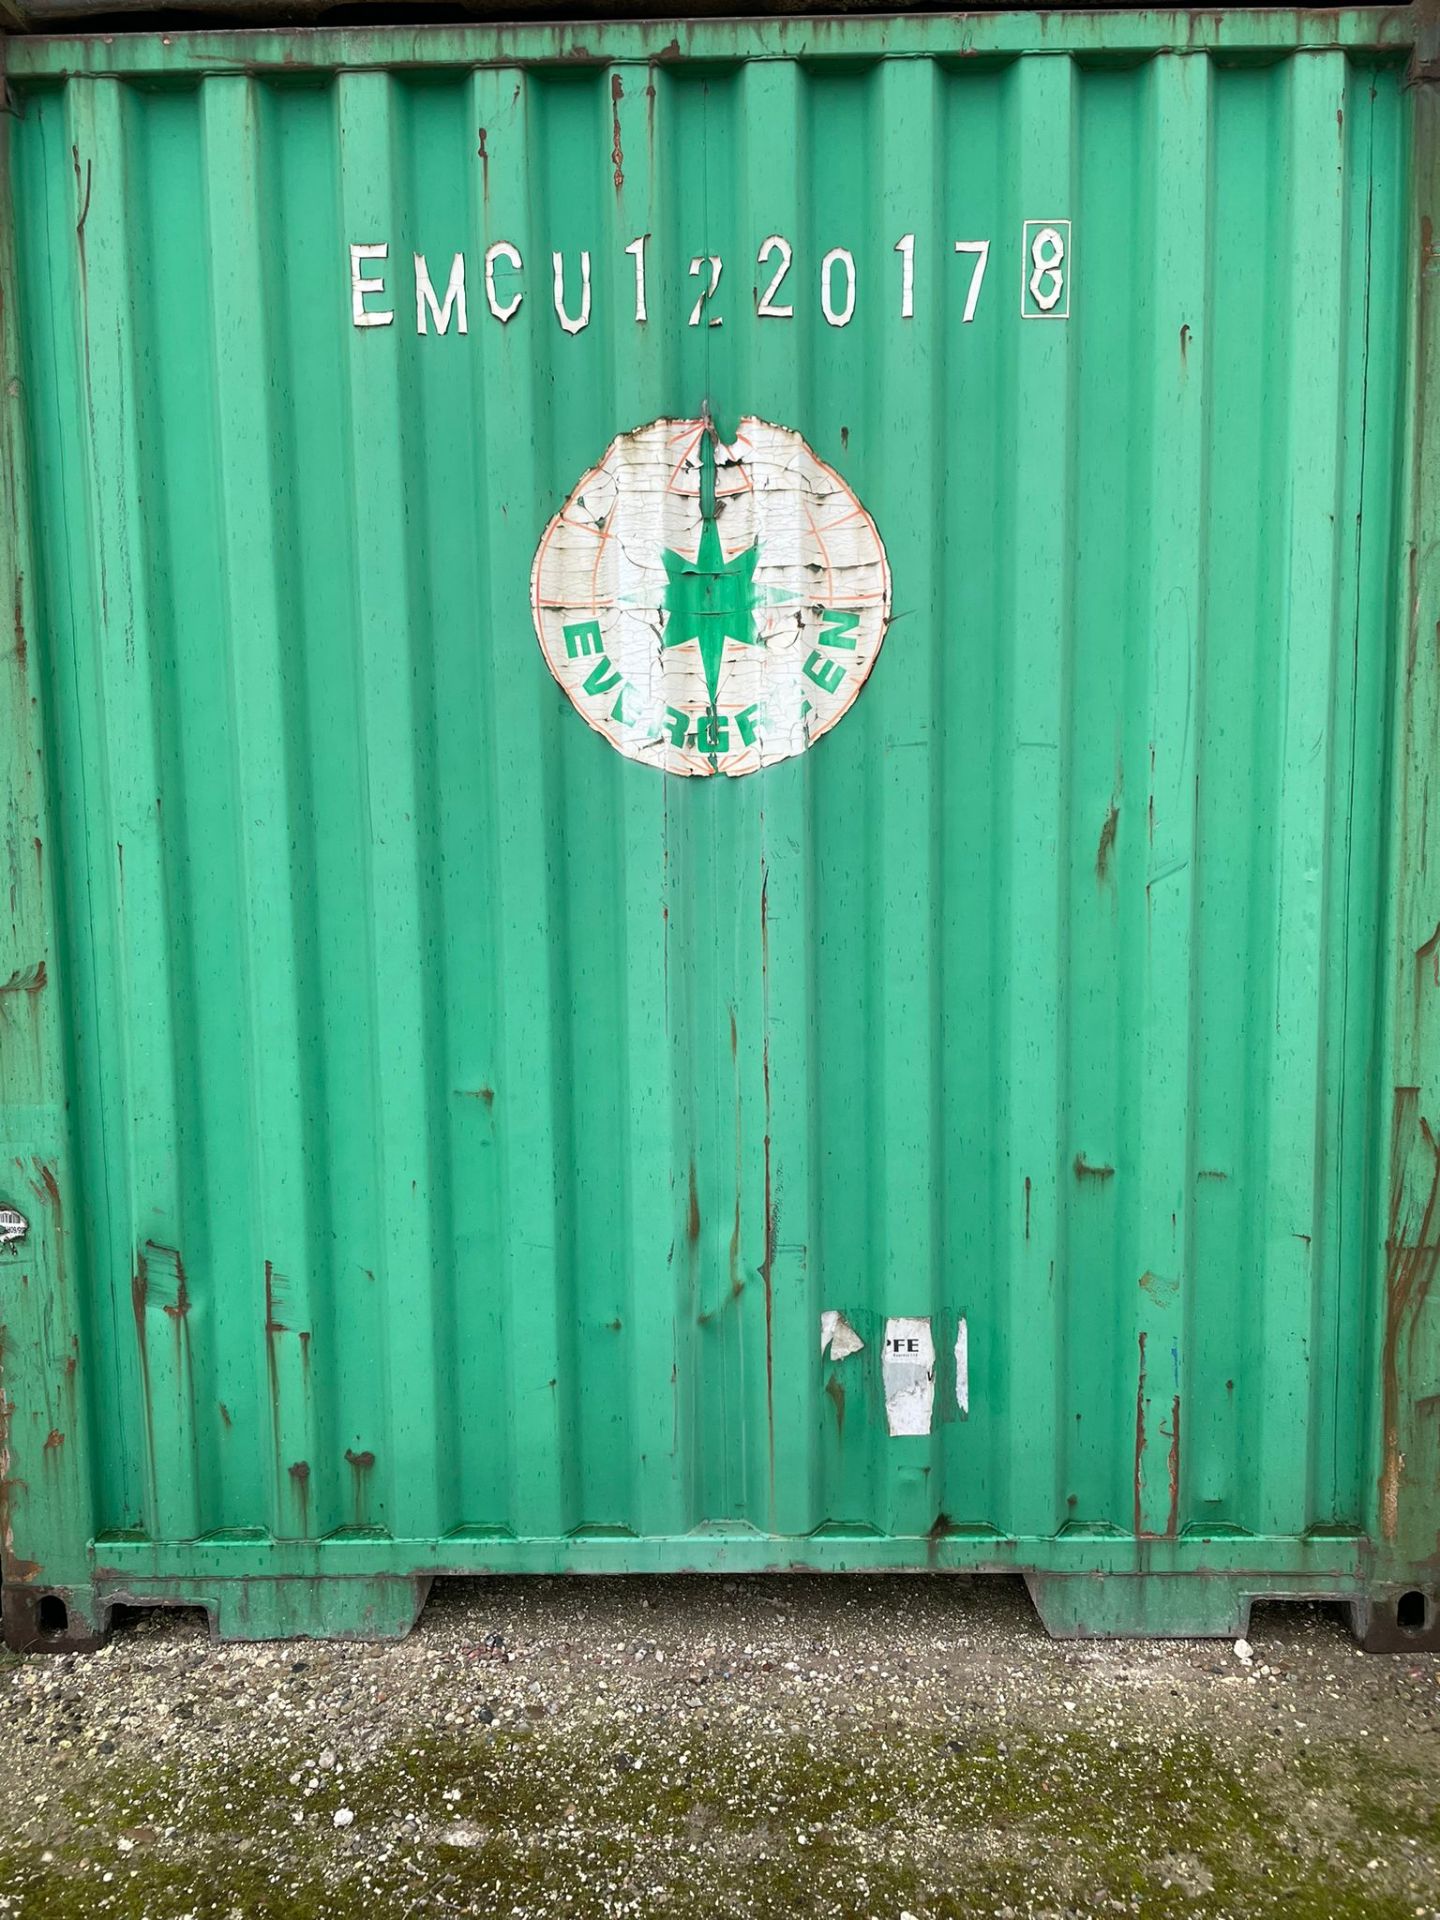 Shipping Container - ref EMCU1220178 - NO RESERVE (40’ GP - Standard) - Image 4 of 4